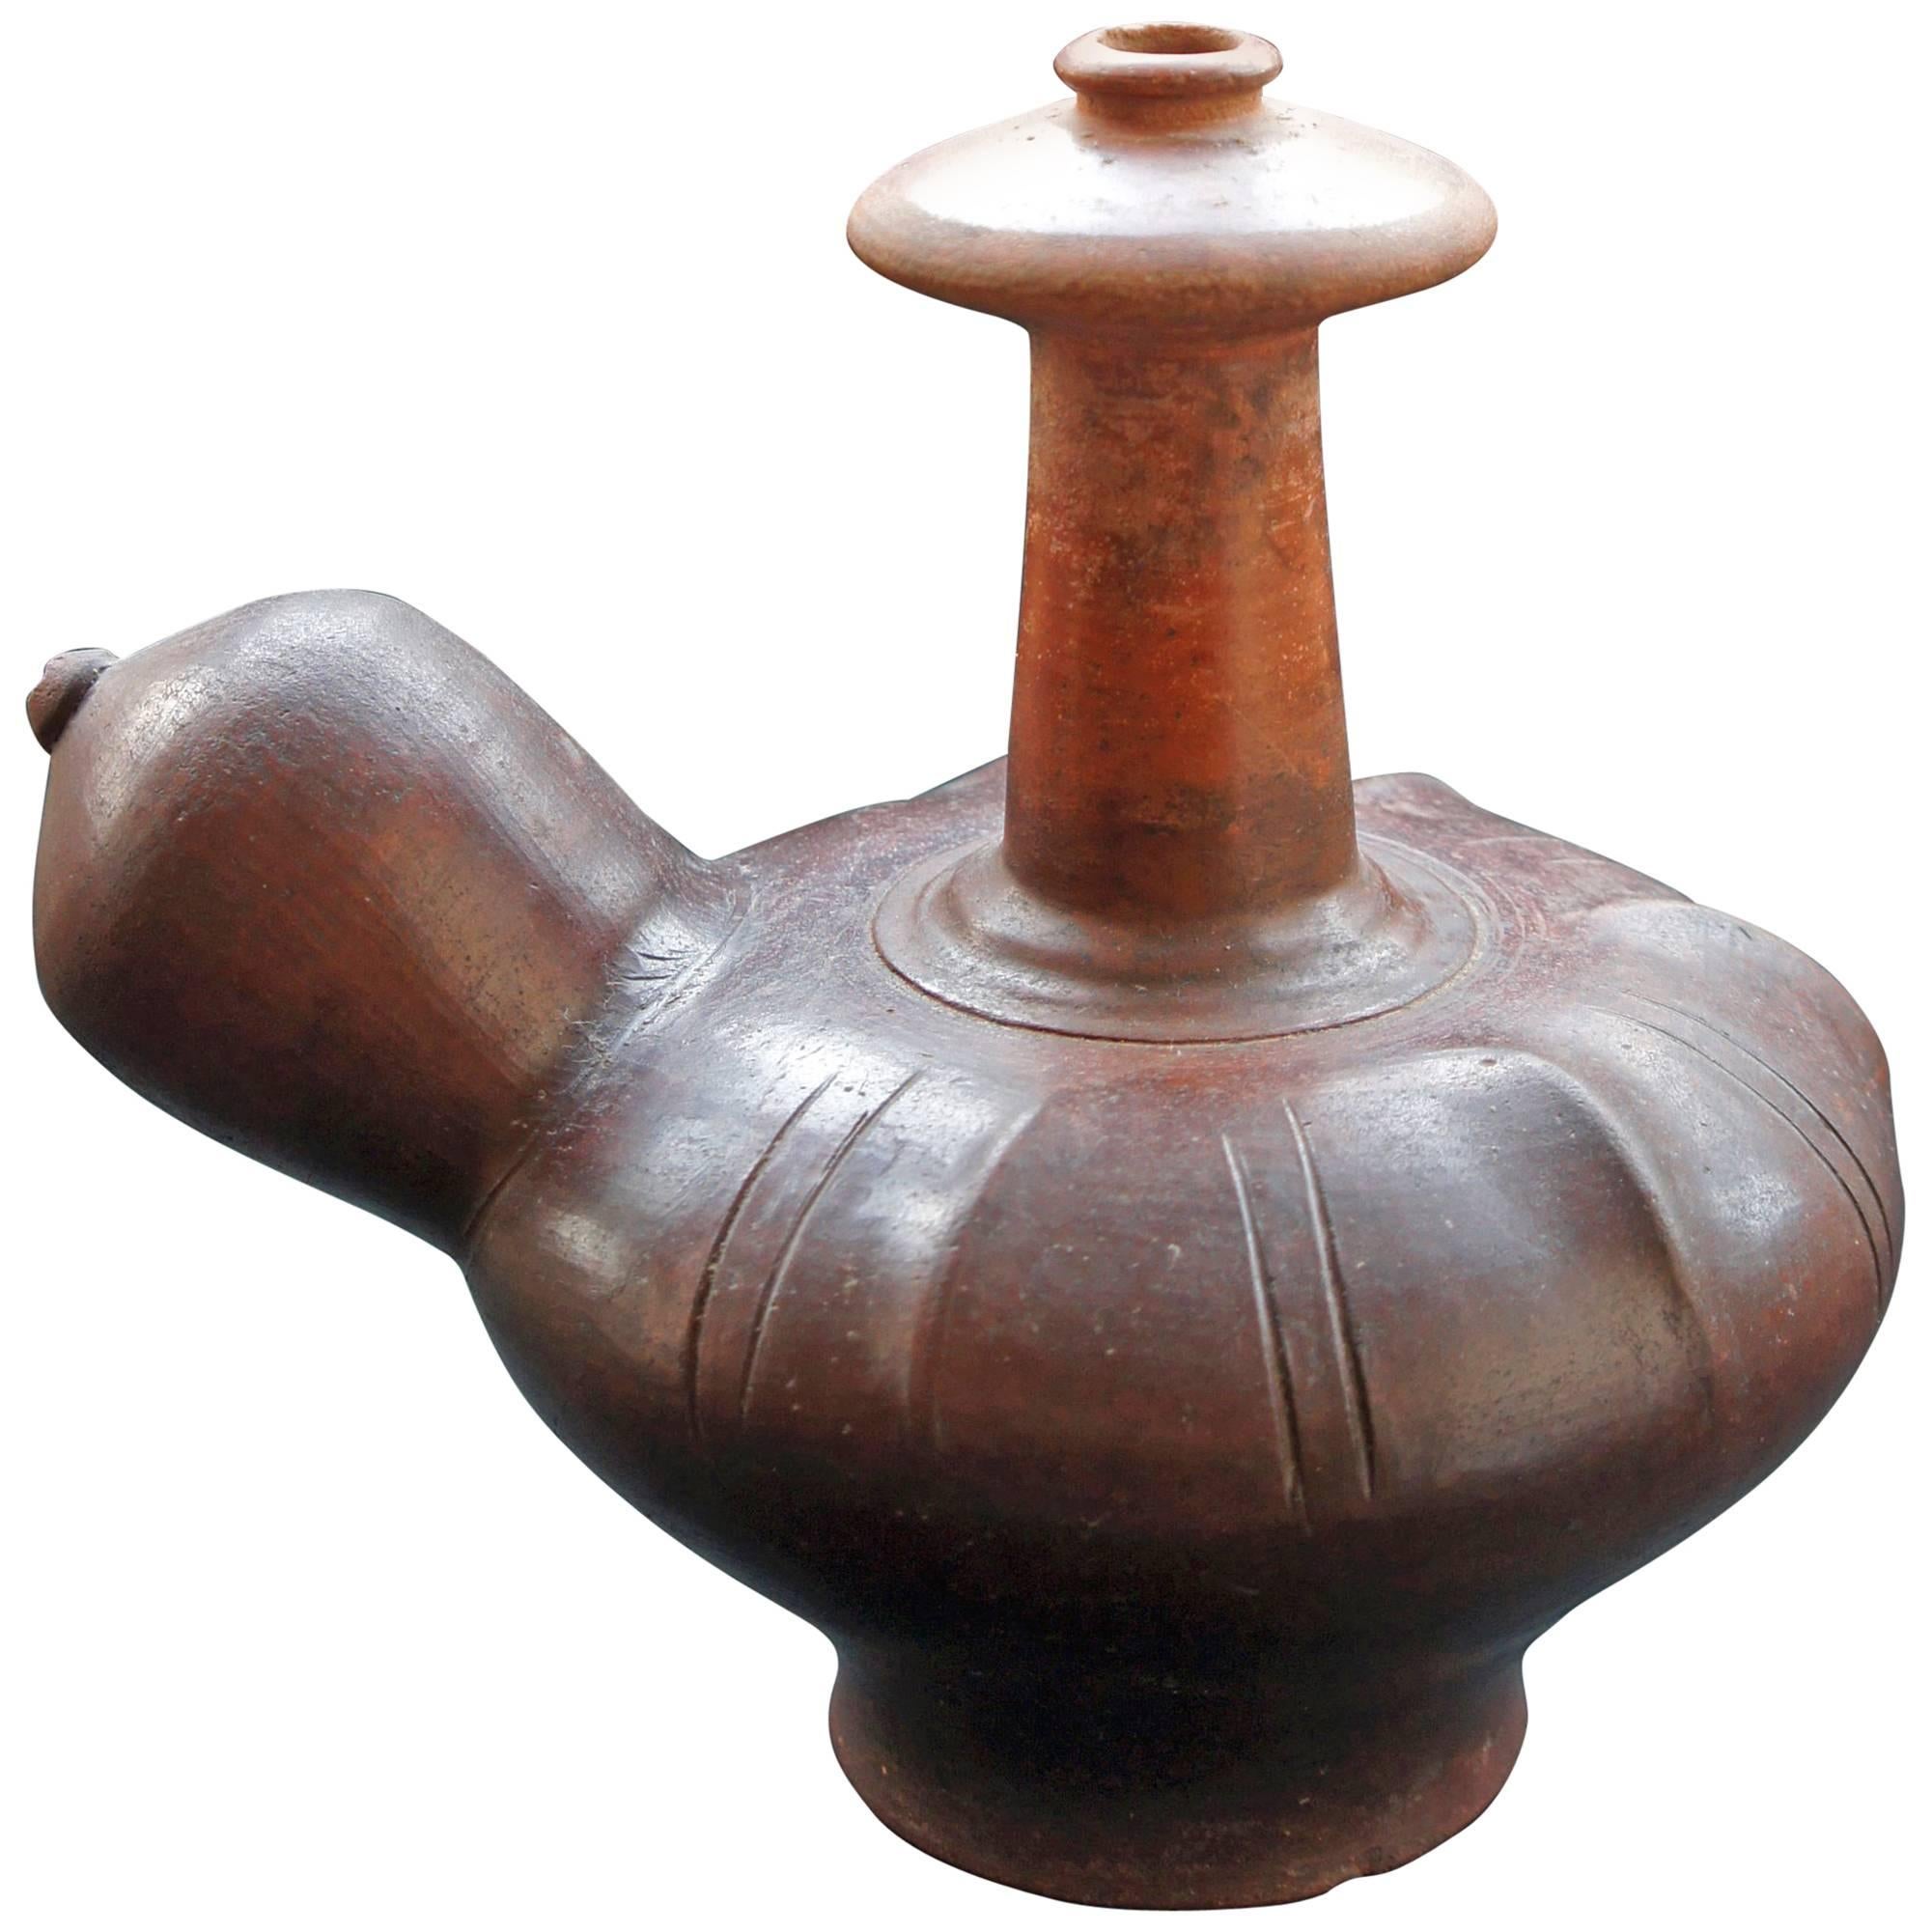 Terracotta Ewer (Kendi) Java, Indonesia, early to mid 20th century For Sale